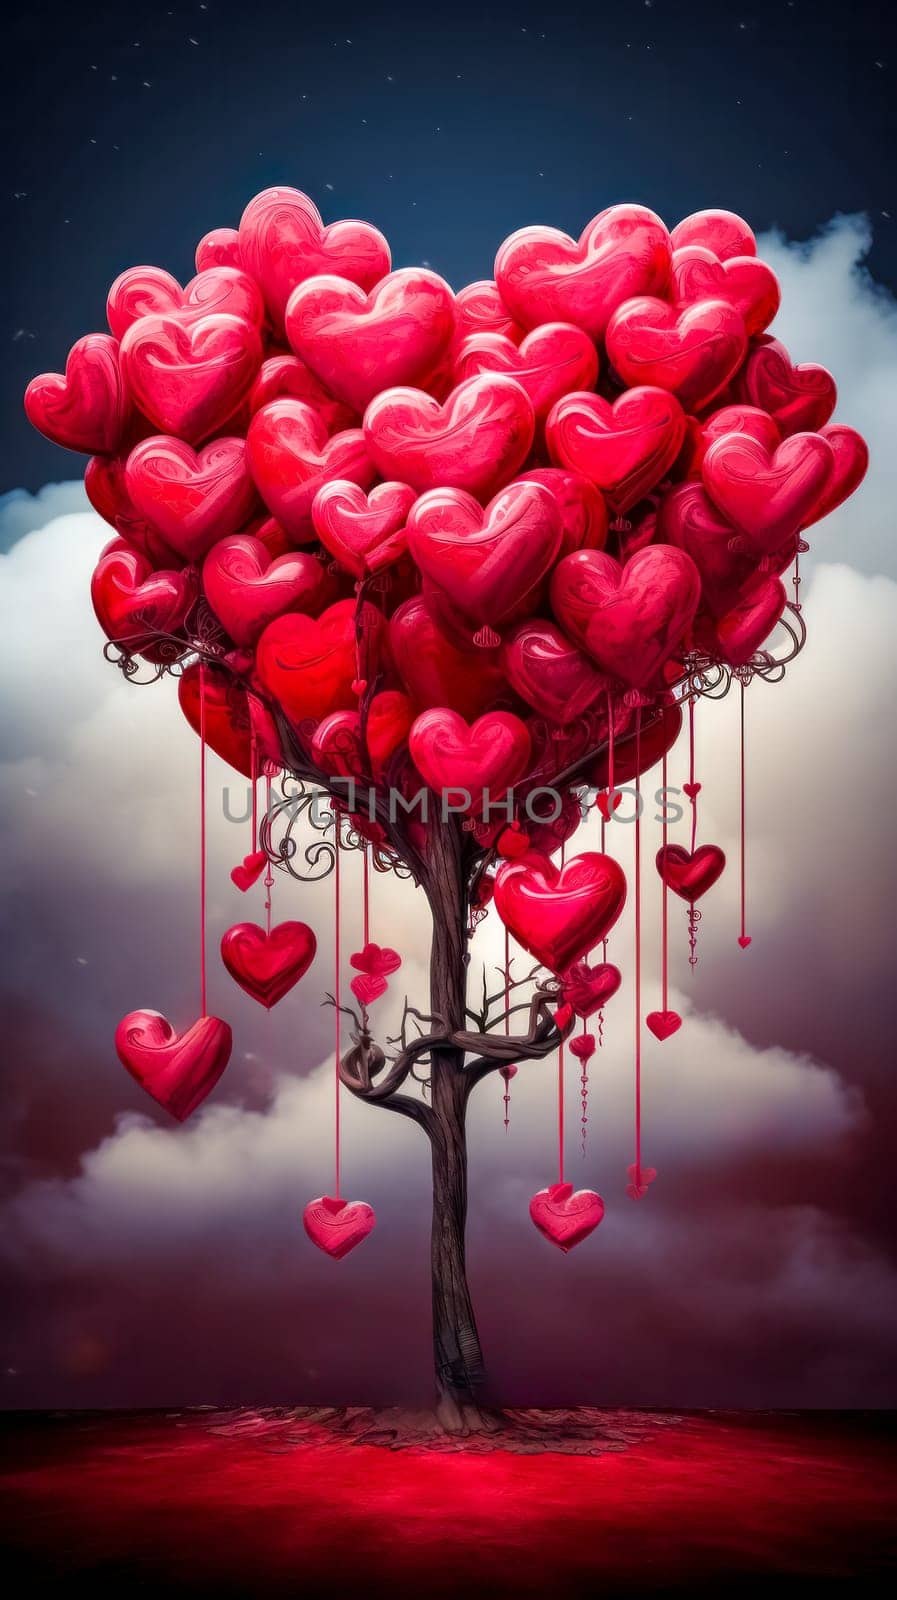 valentine day, whimsical tree with branches forming a canopy of glossy, oversized red heart-shaped balloons against a dramatic sky, symbolizing love and romance in a surreal, artistic setting. by Edophoto